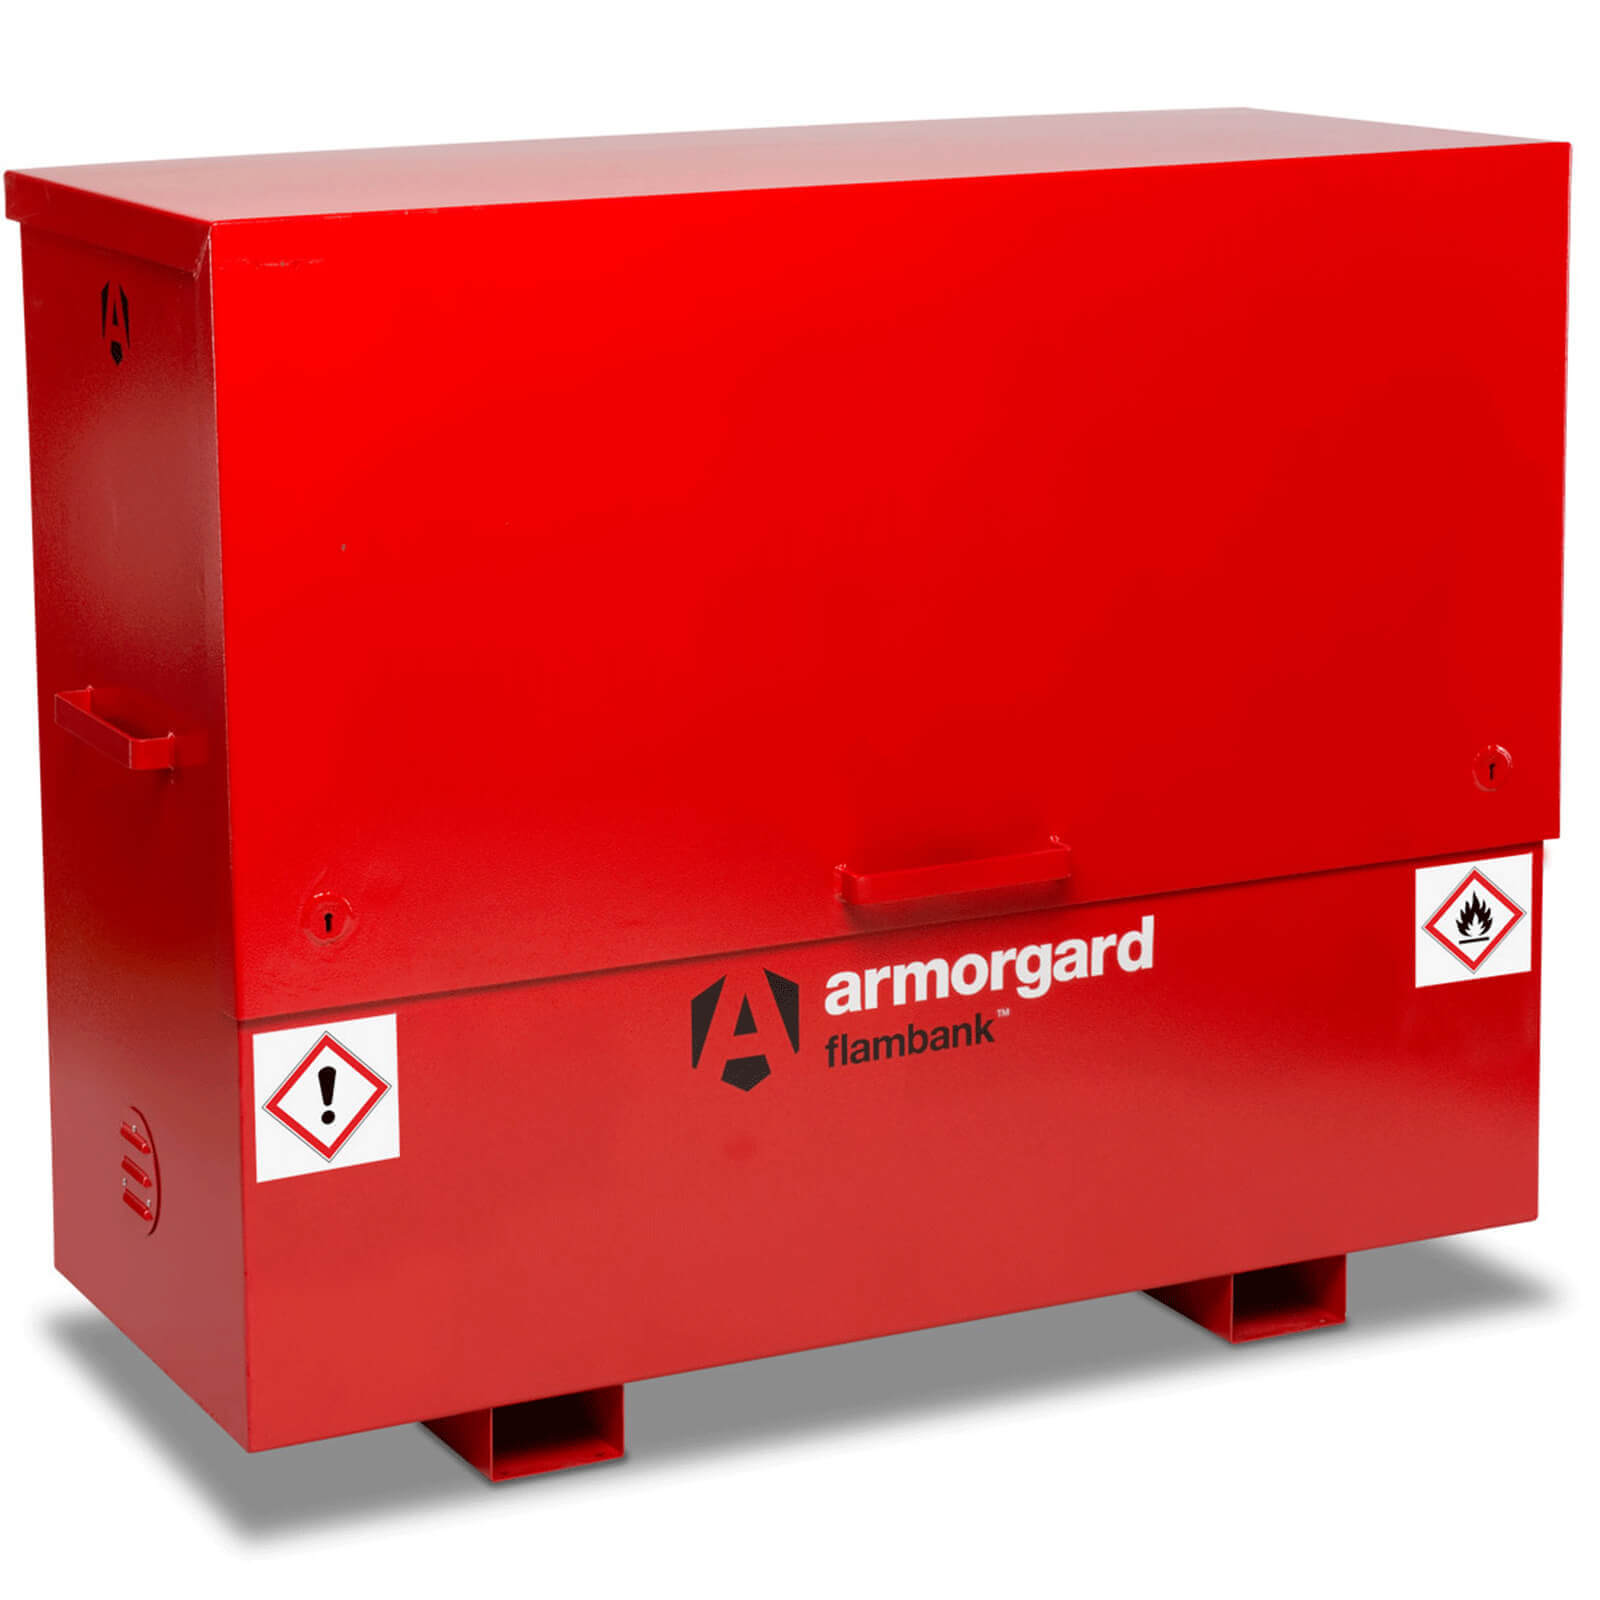 Image of Armorgard Flambank Chemical and Flammables Secure Site Storage Chest 1585mm 675mm 1275mm